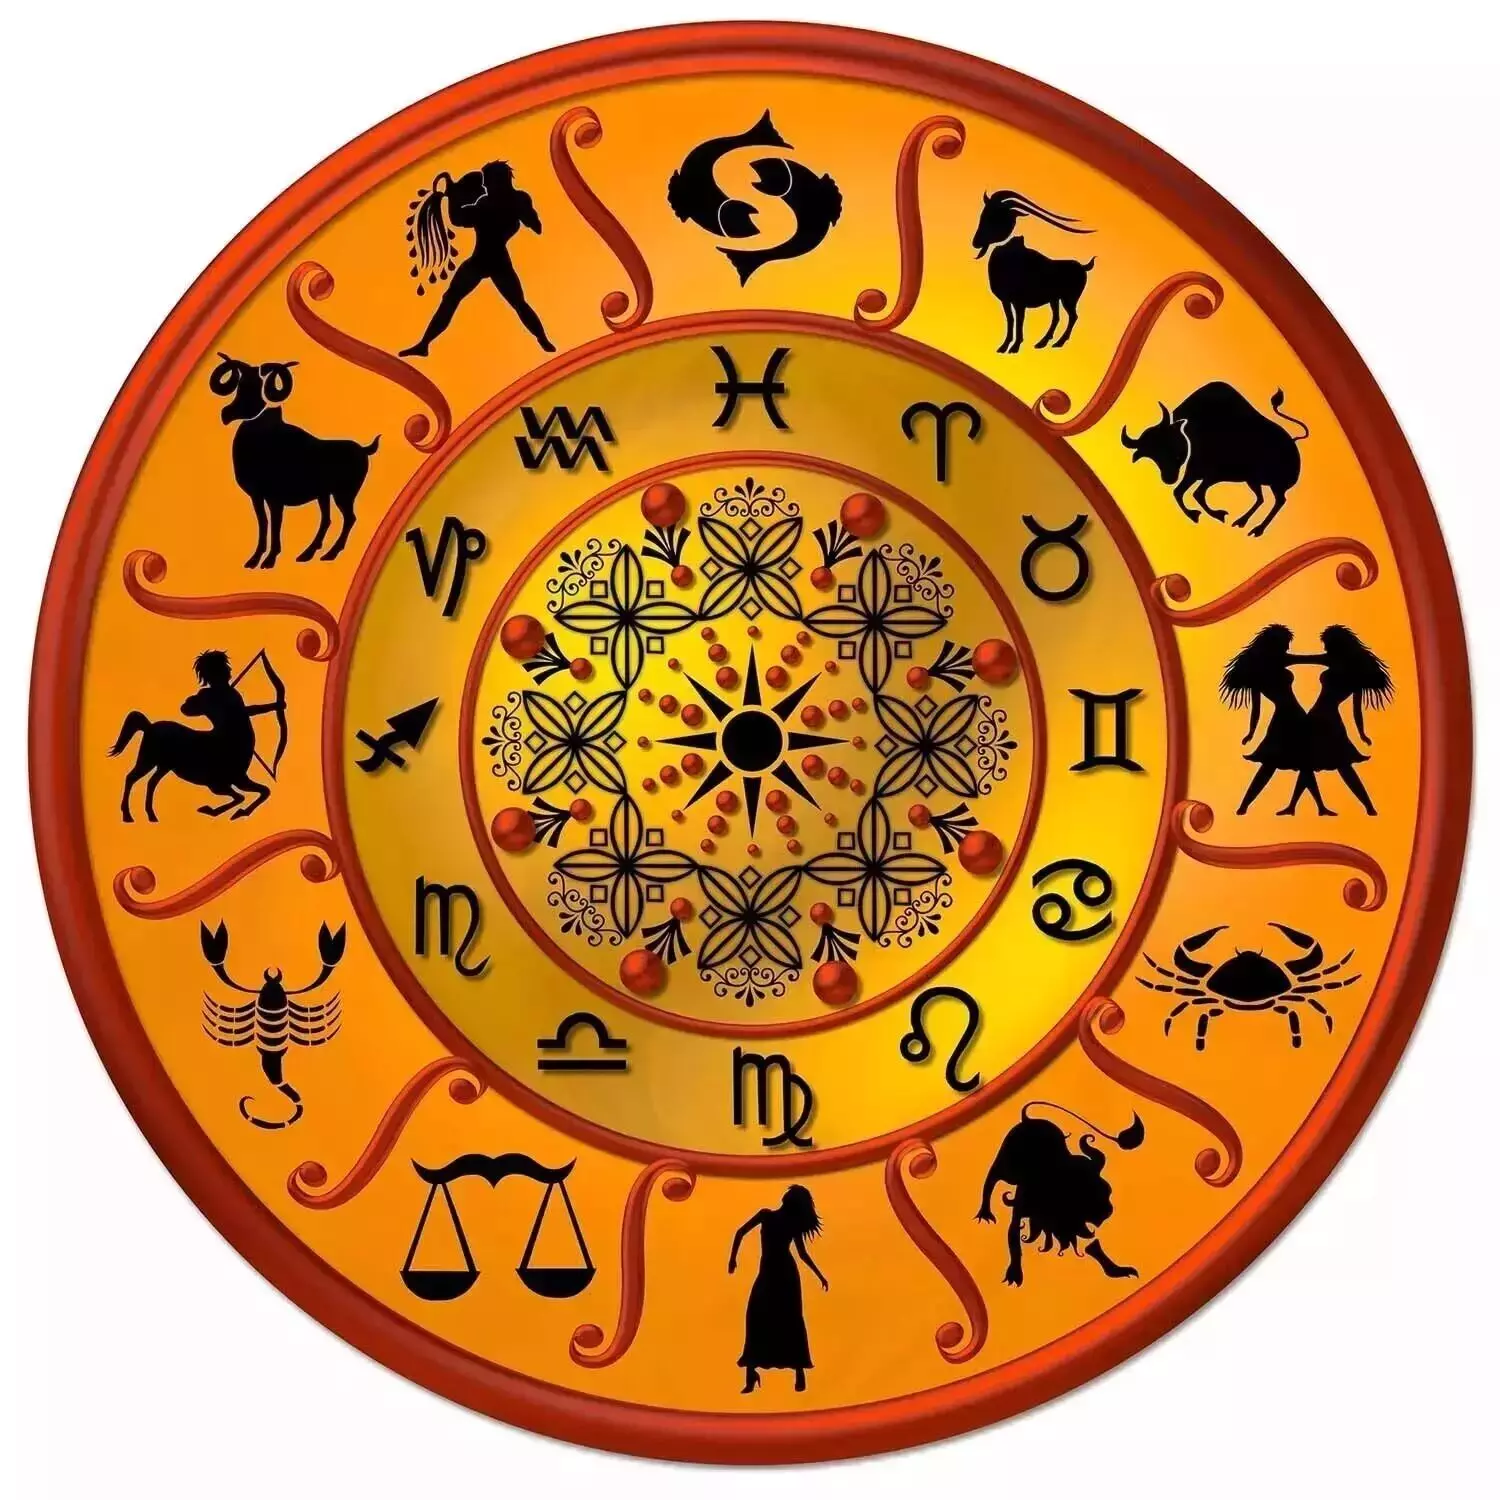 28 January – Know your todays horoscope